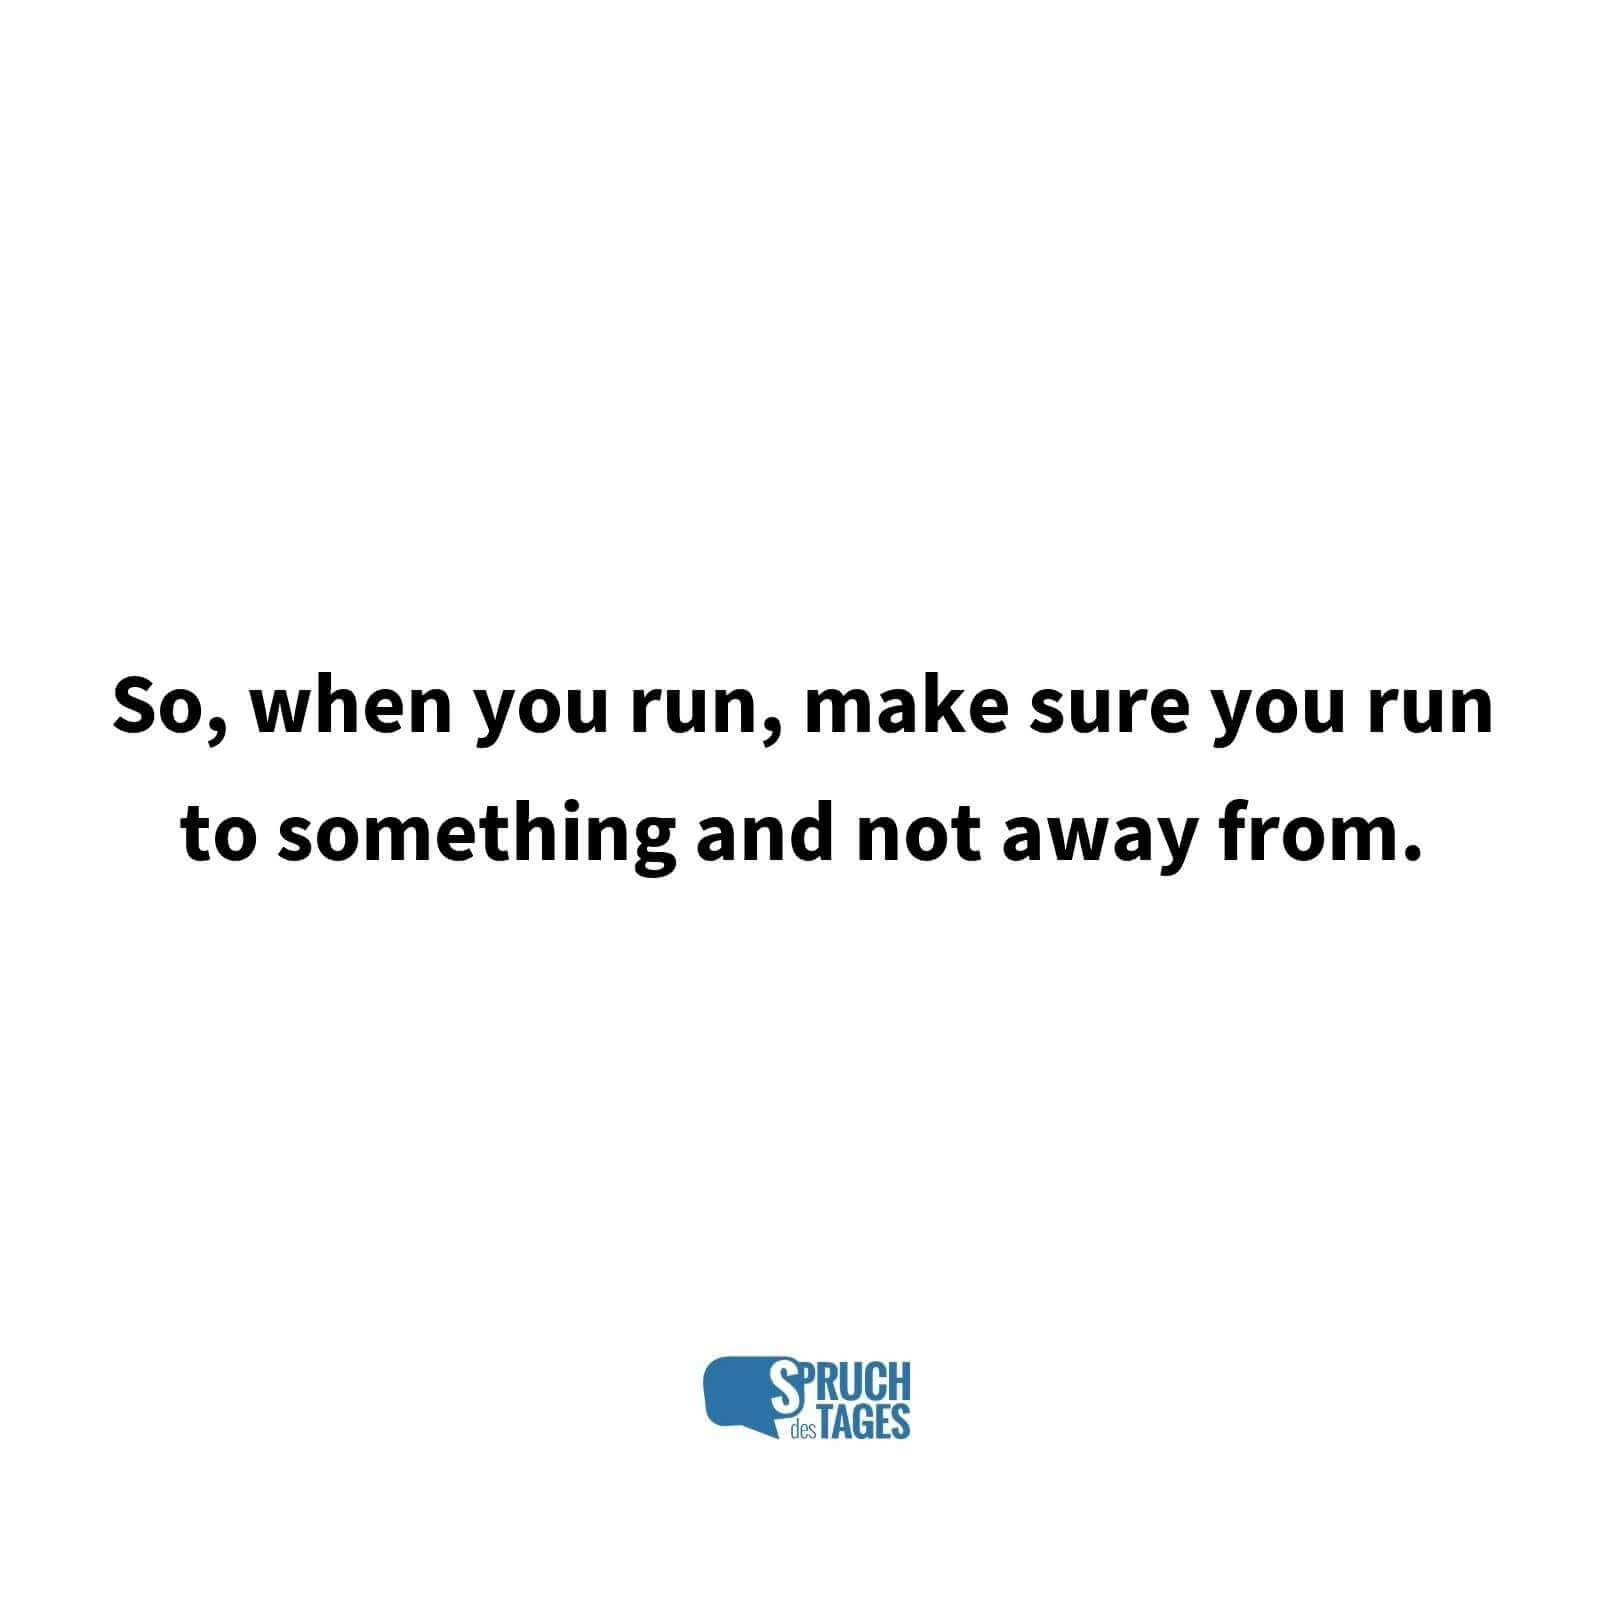 So,when you run, make sure you run to something and not away from.